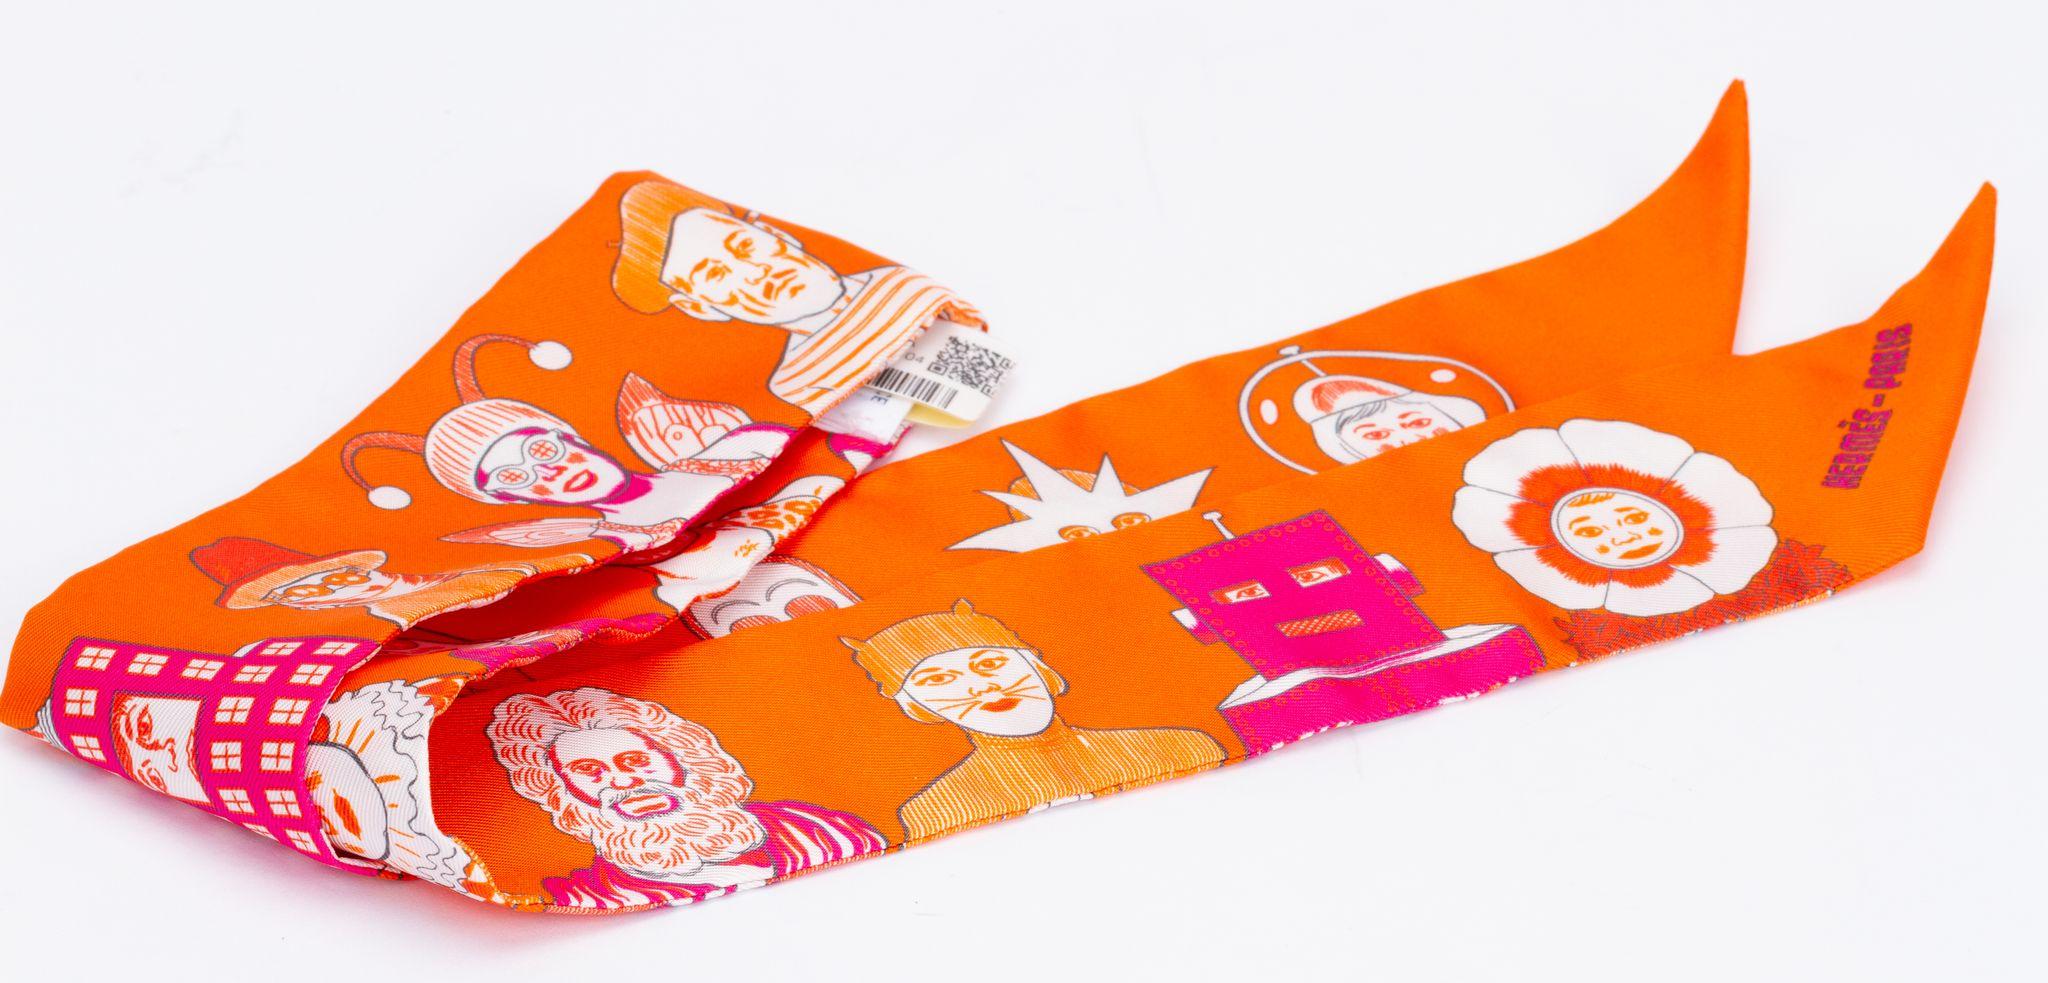 New Hermès Dresscode Edition twilly. The scarf is made out of silk and comes in a vibrant orange. The print shows different characters for example the statue of liberty. The piece comes in the original box and pouch.